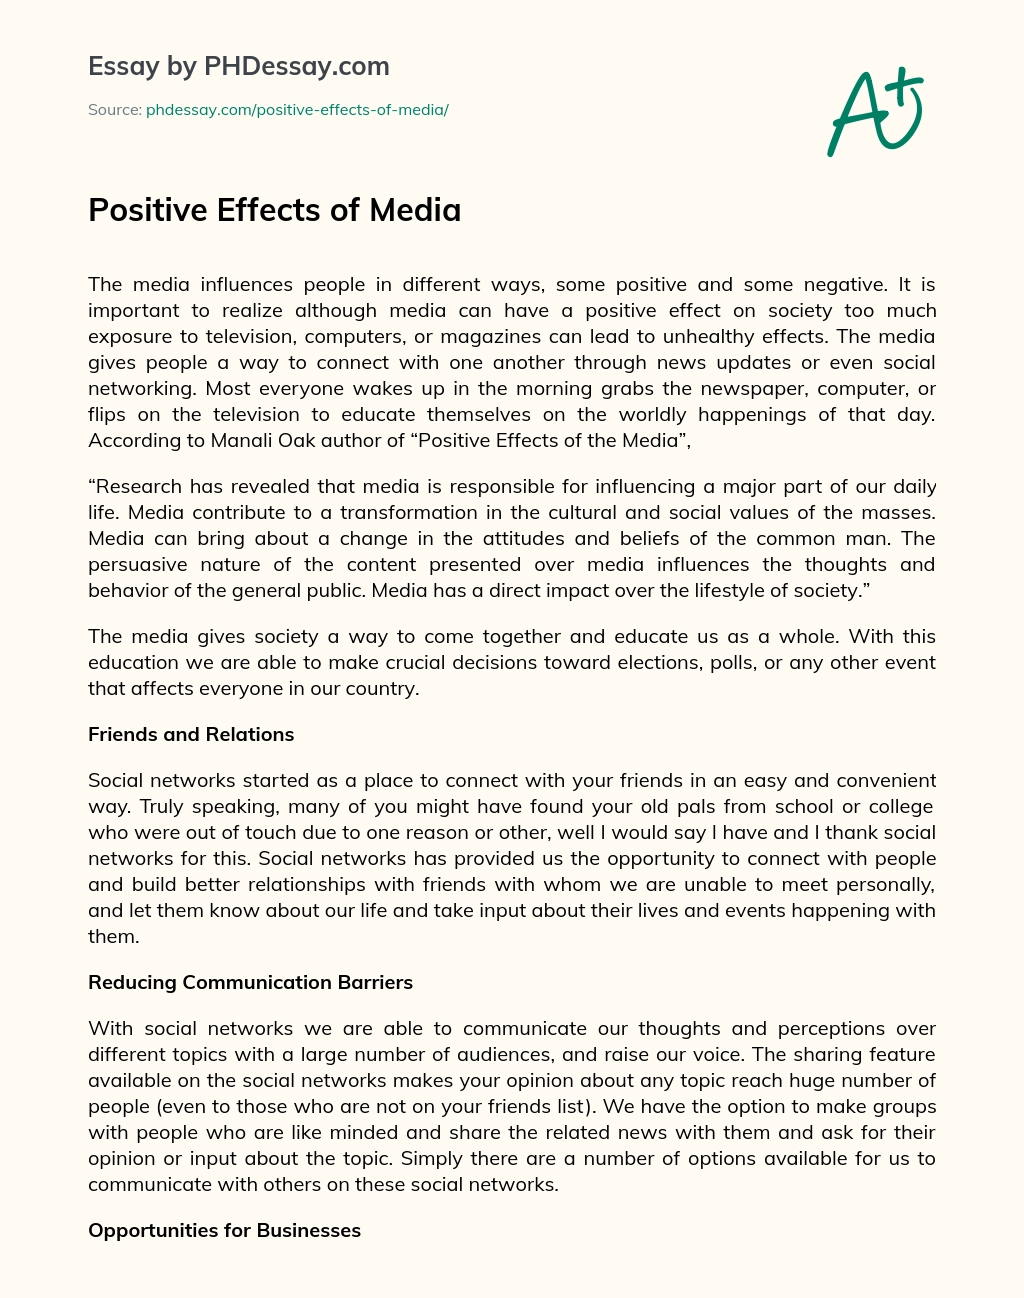 Positive Effects of Media essay